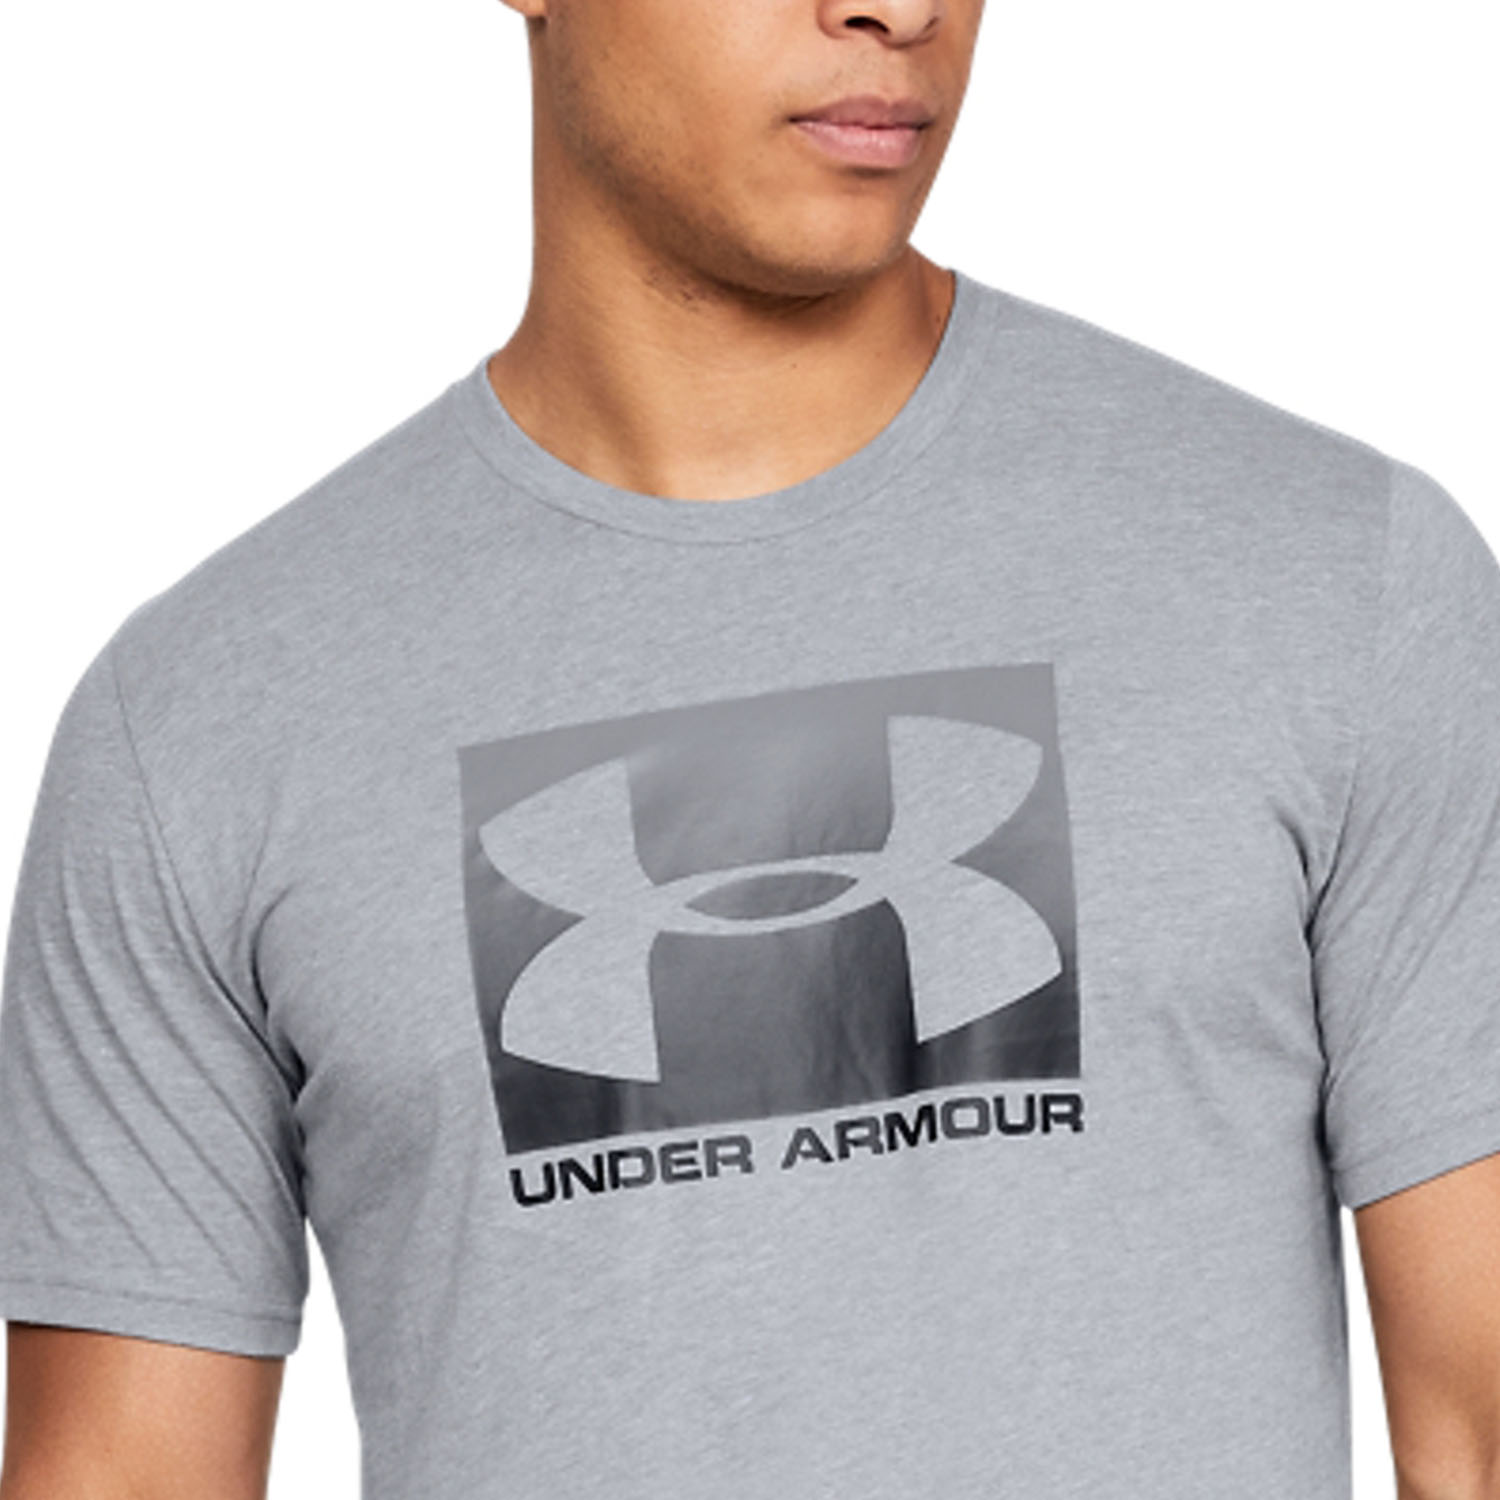 Under Armour Boxed Sportstyle T-Shirt - Steel Light Heather/Graphite/Black